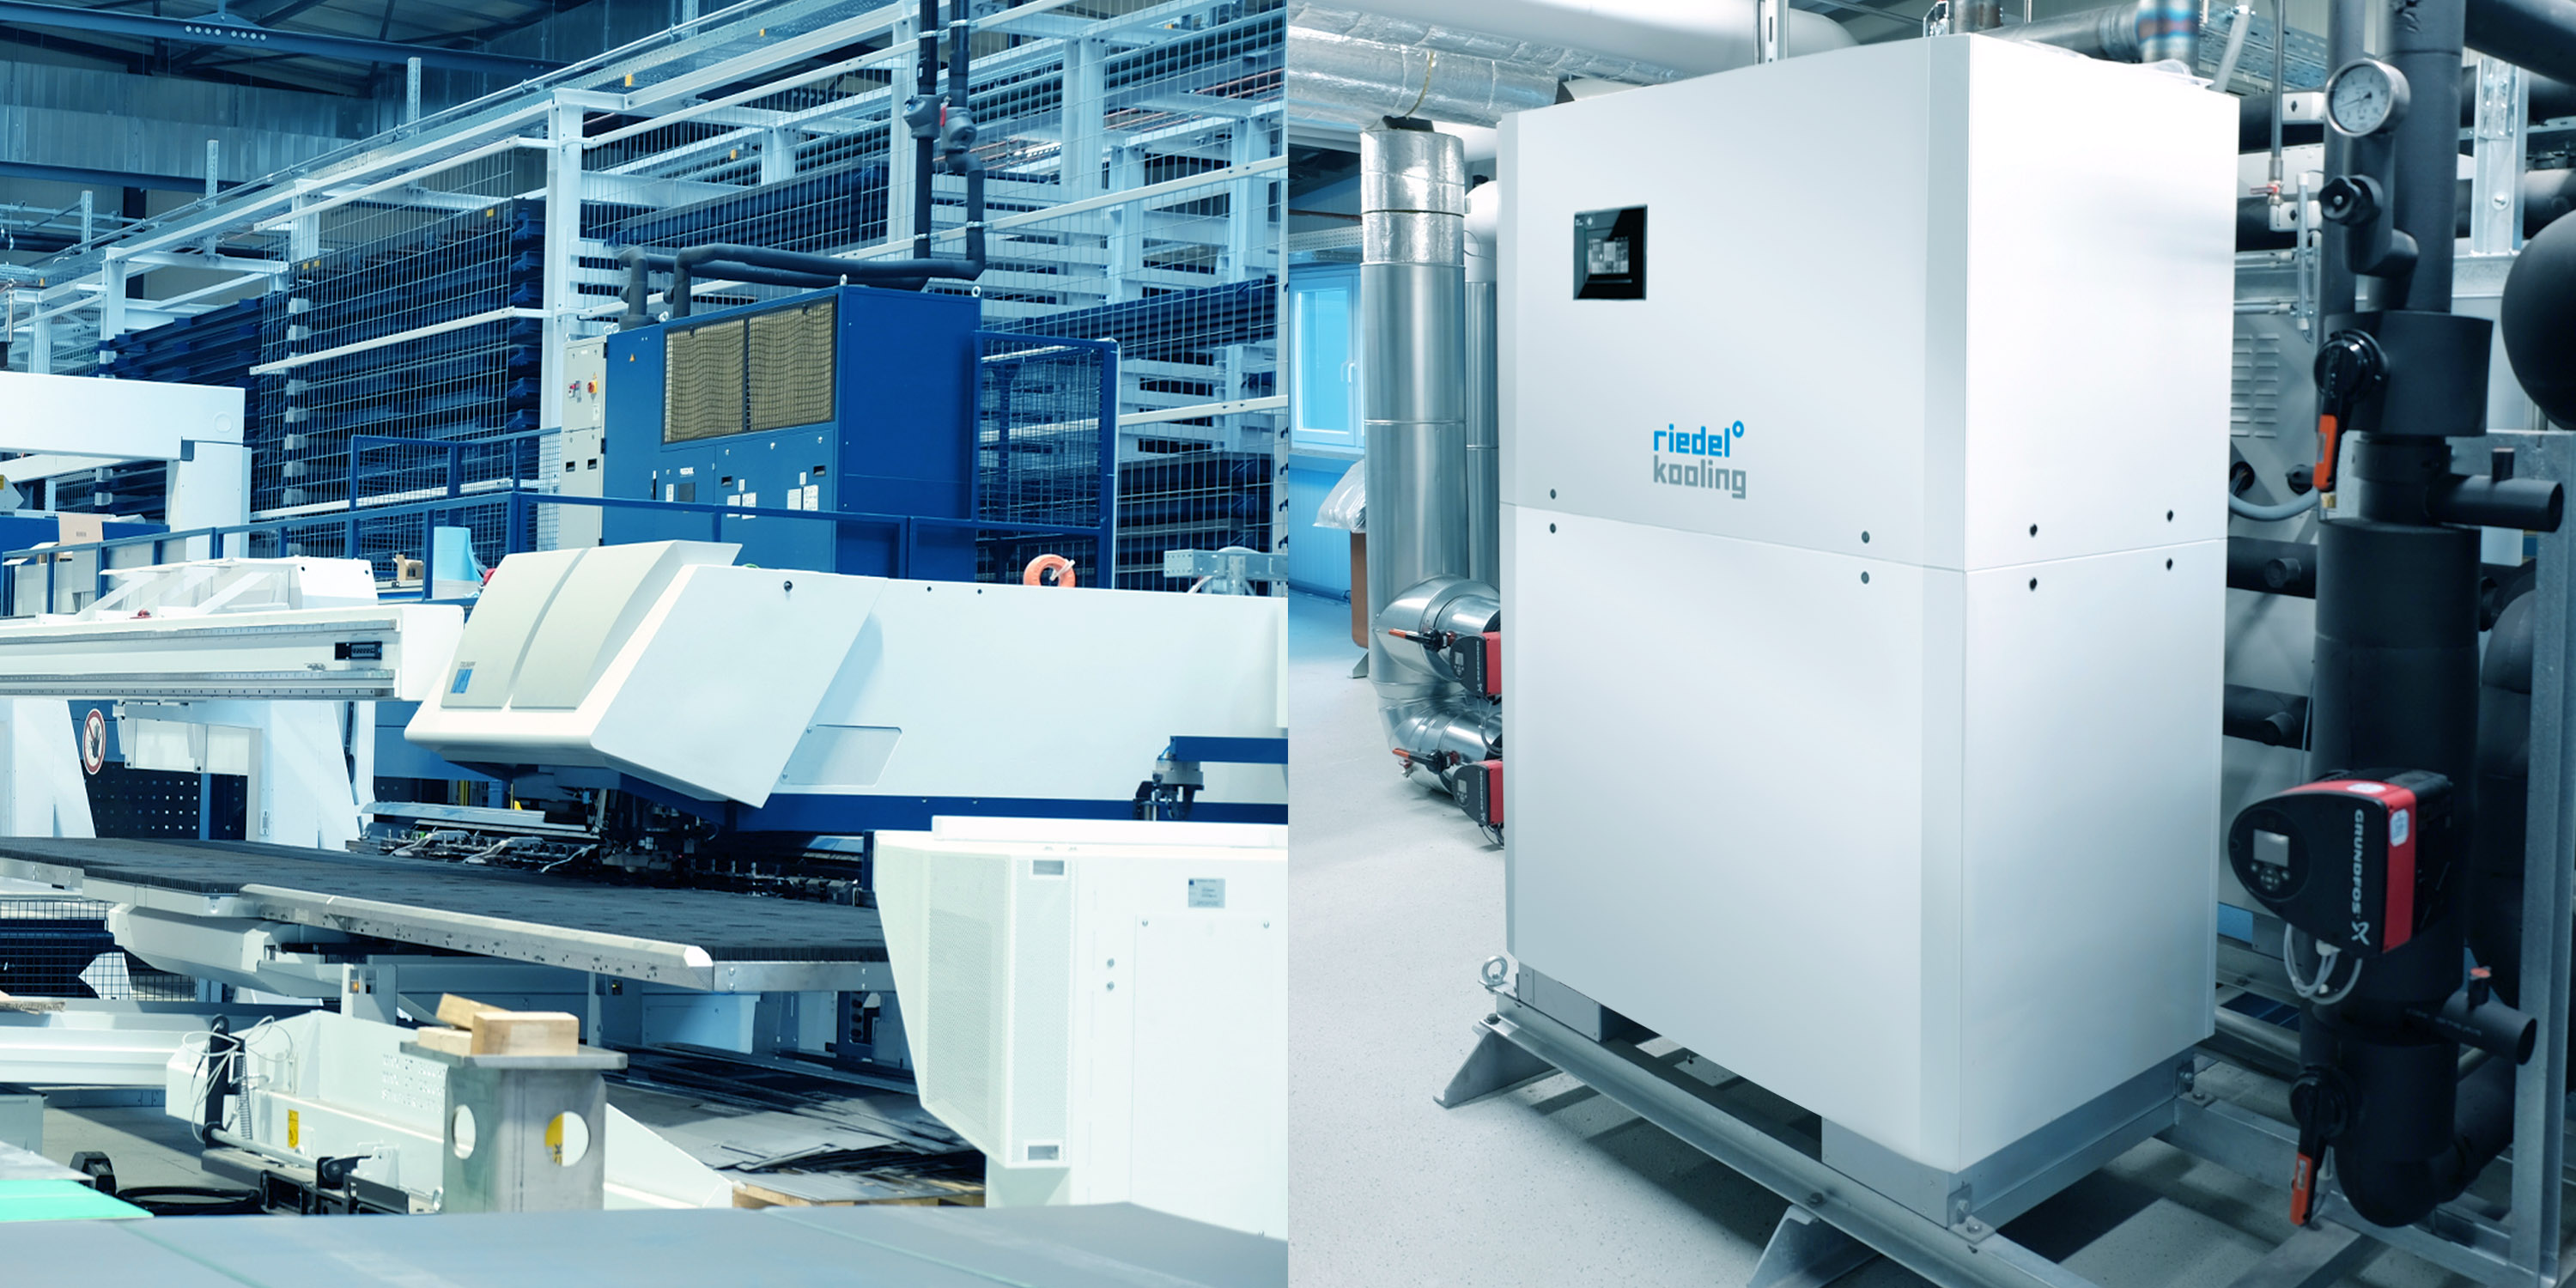 Riedel Kooling, heat pump system solution for cooling, heating, waste heat recovery and hot water production.